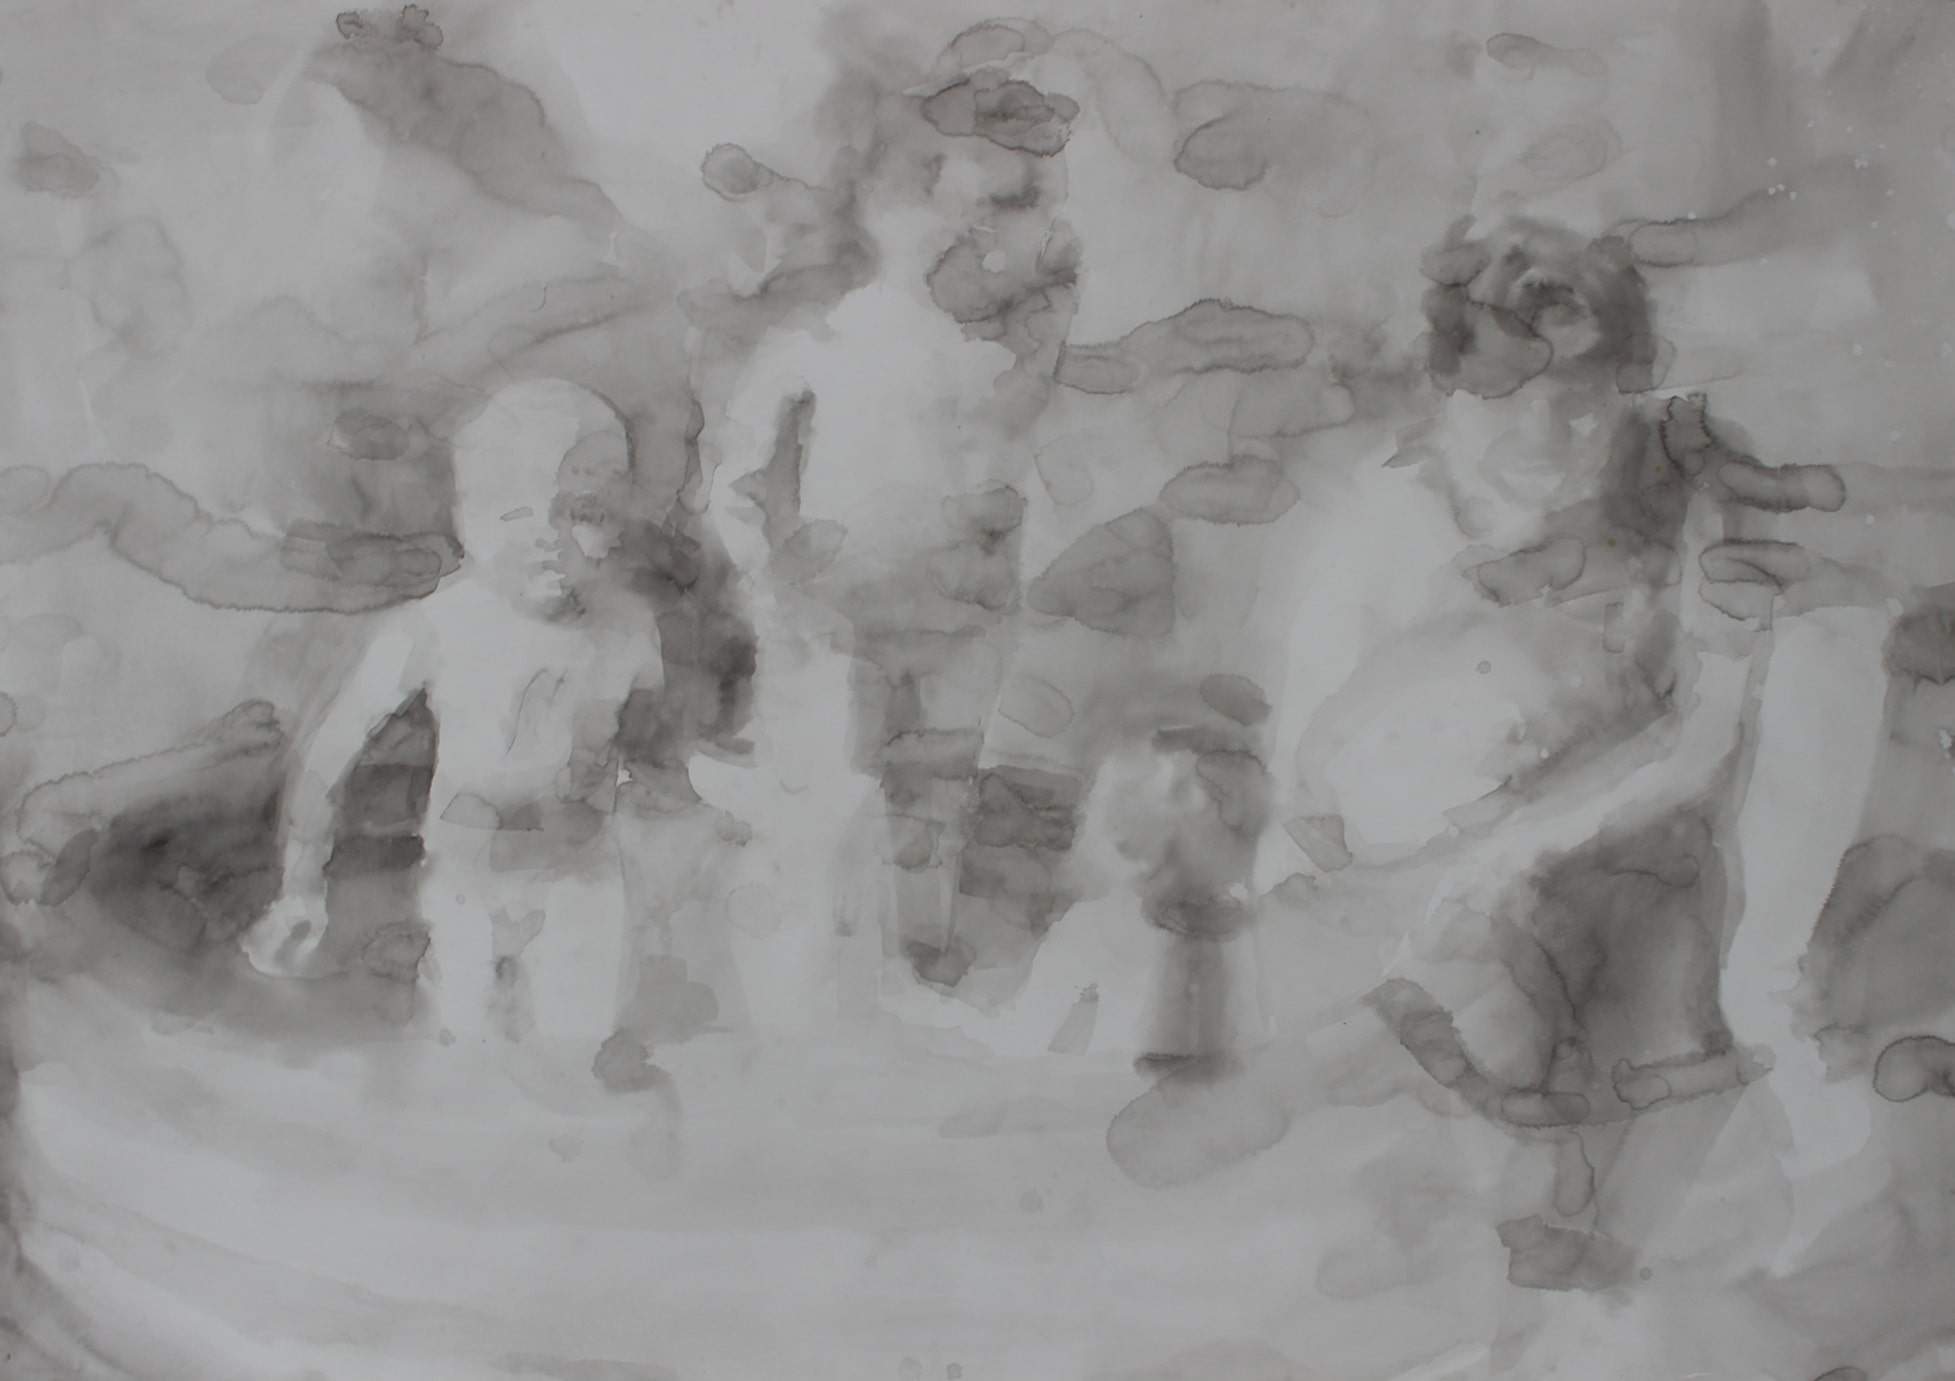 ink on paper, 180 x 140 cm, 2019